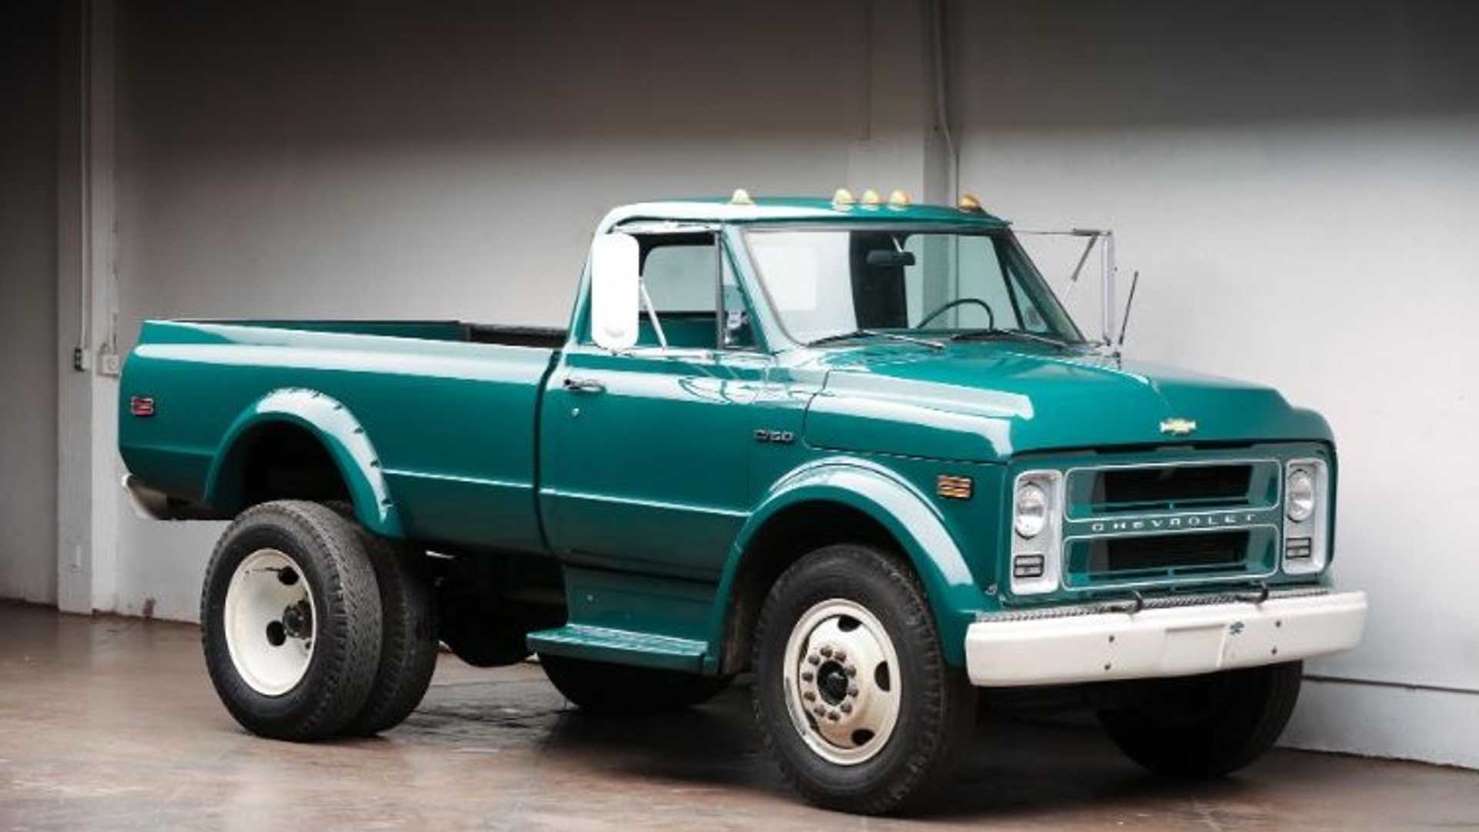 MSN: One-Up Your Buddies With This Monster 1972 Chevy C50